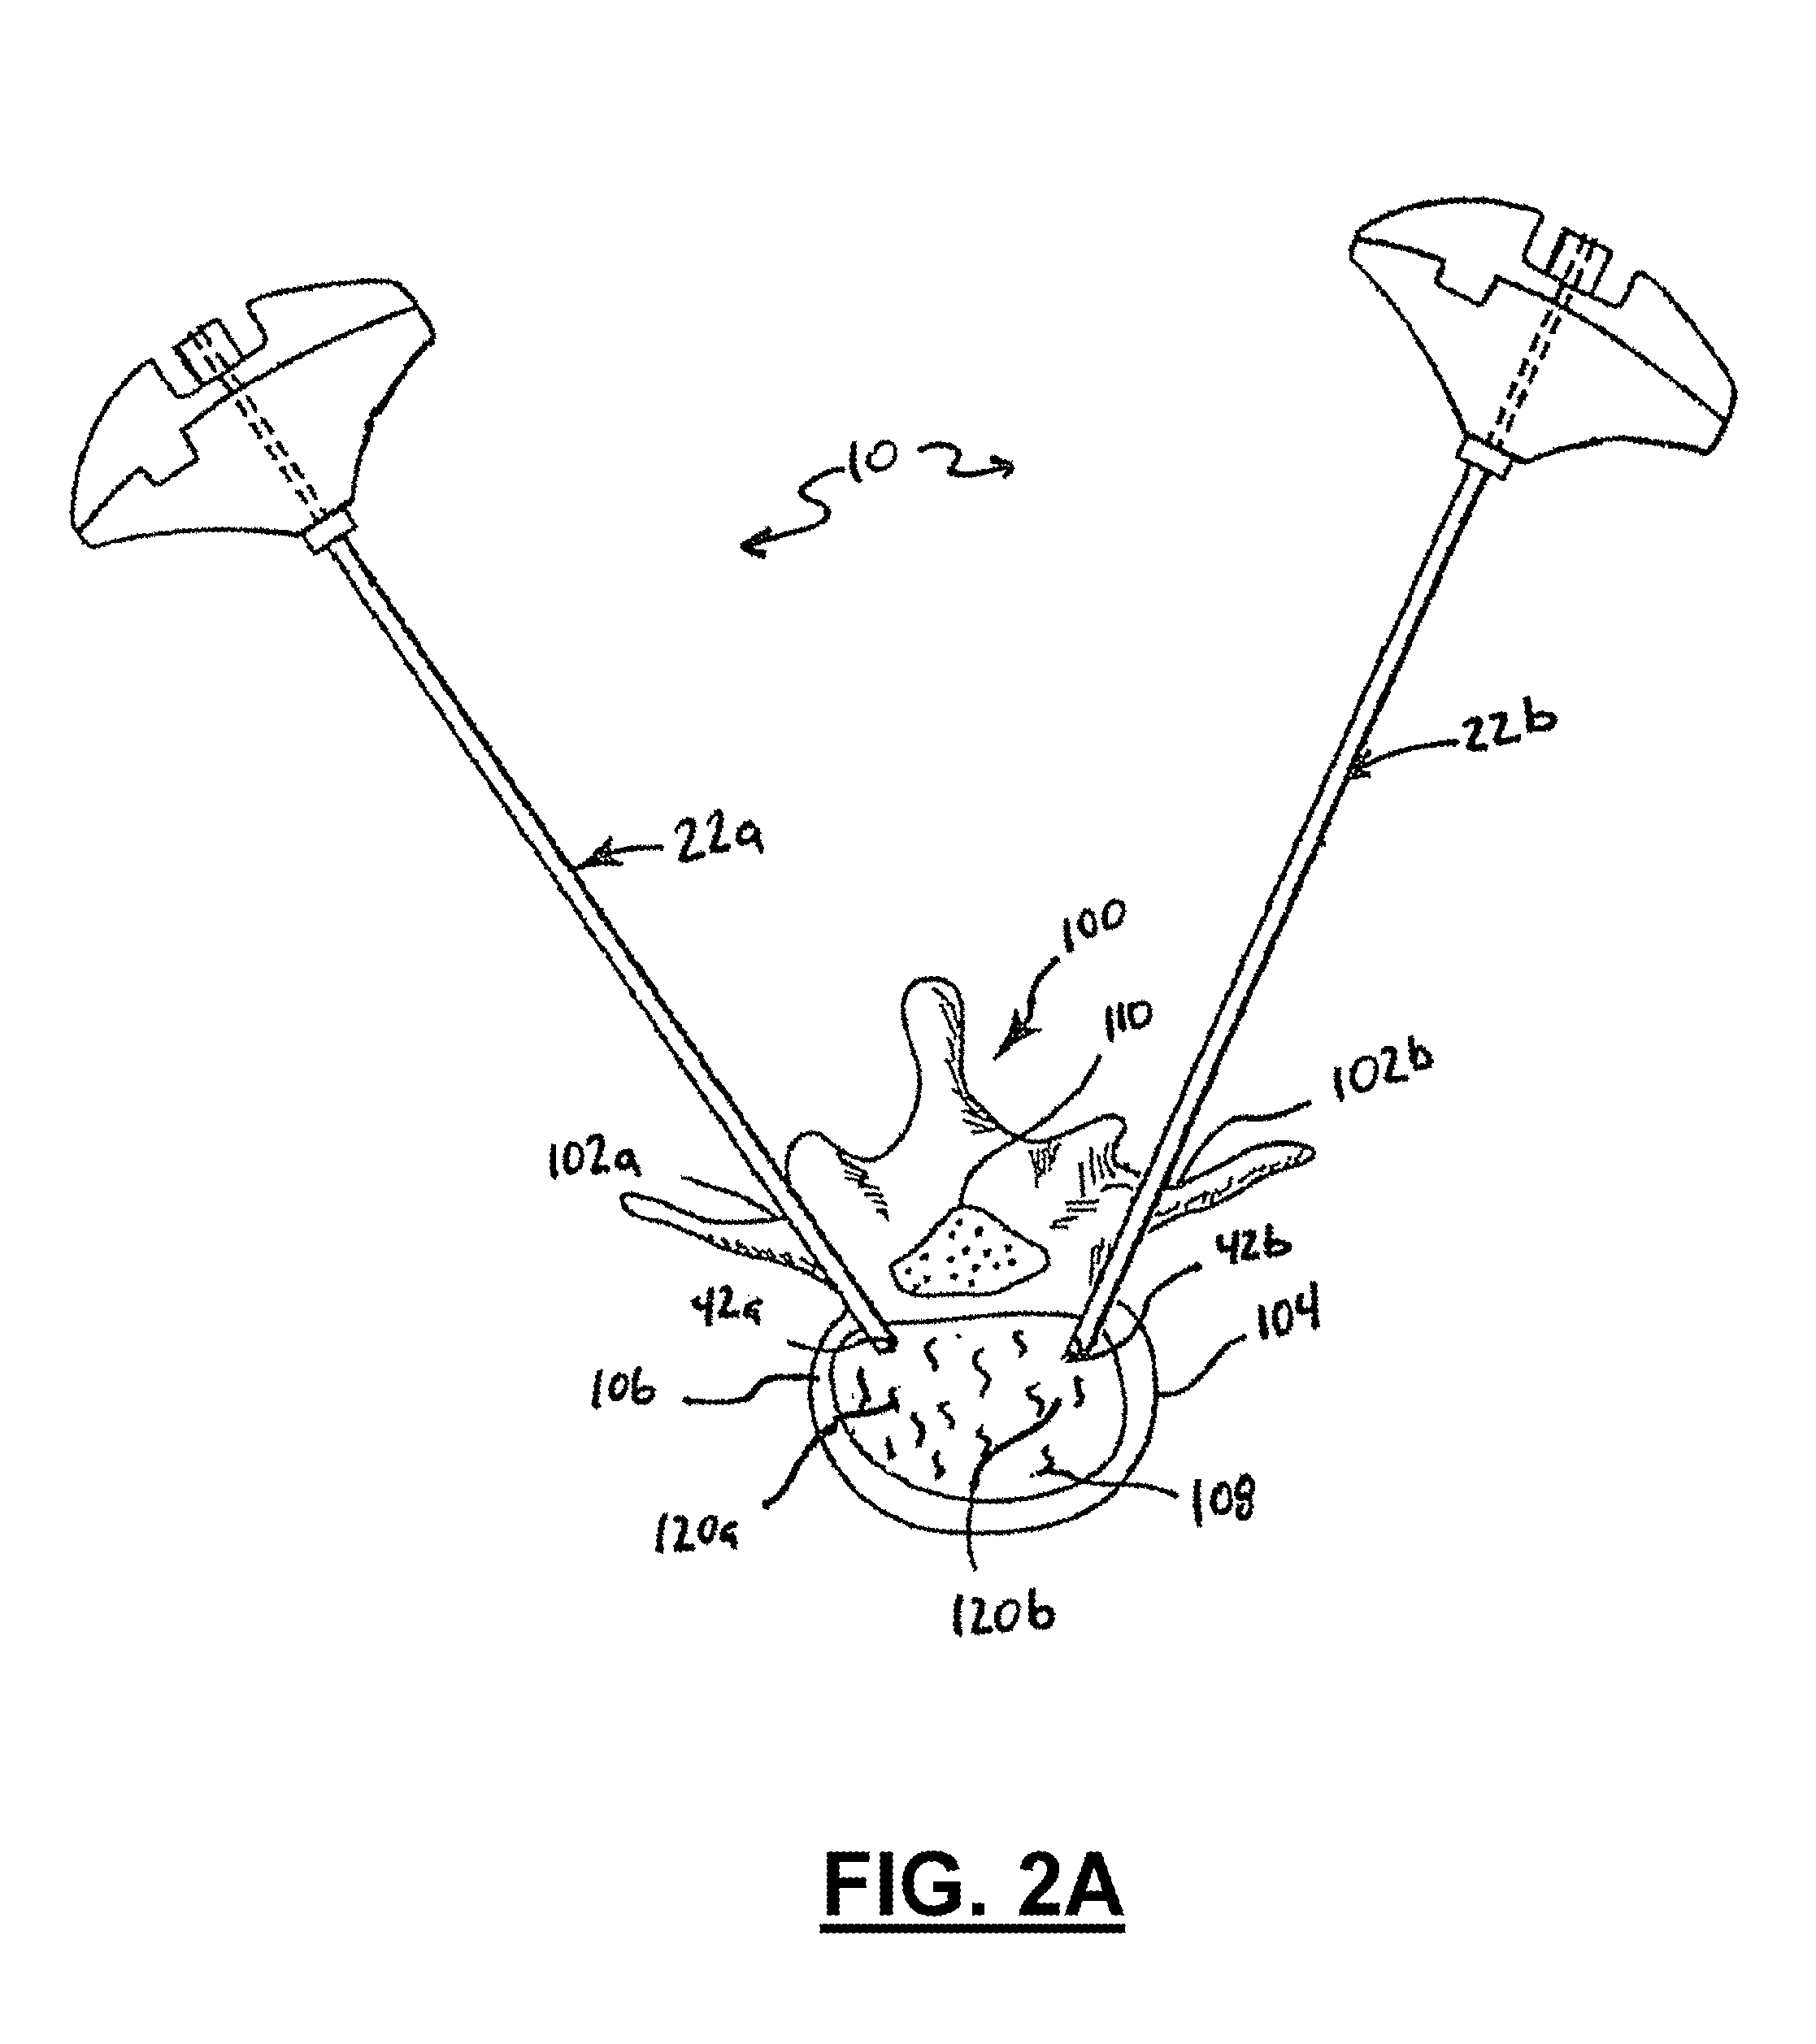 Apparatus and method for stylet-guided vertebral augmentation